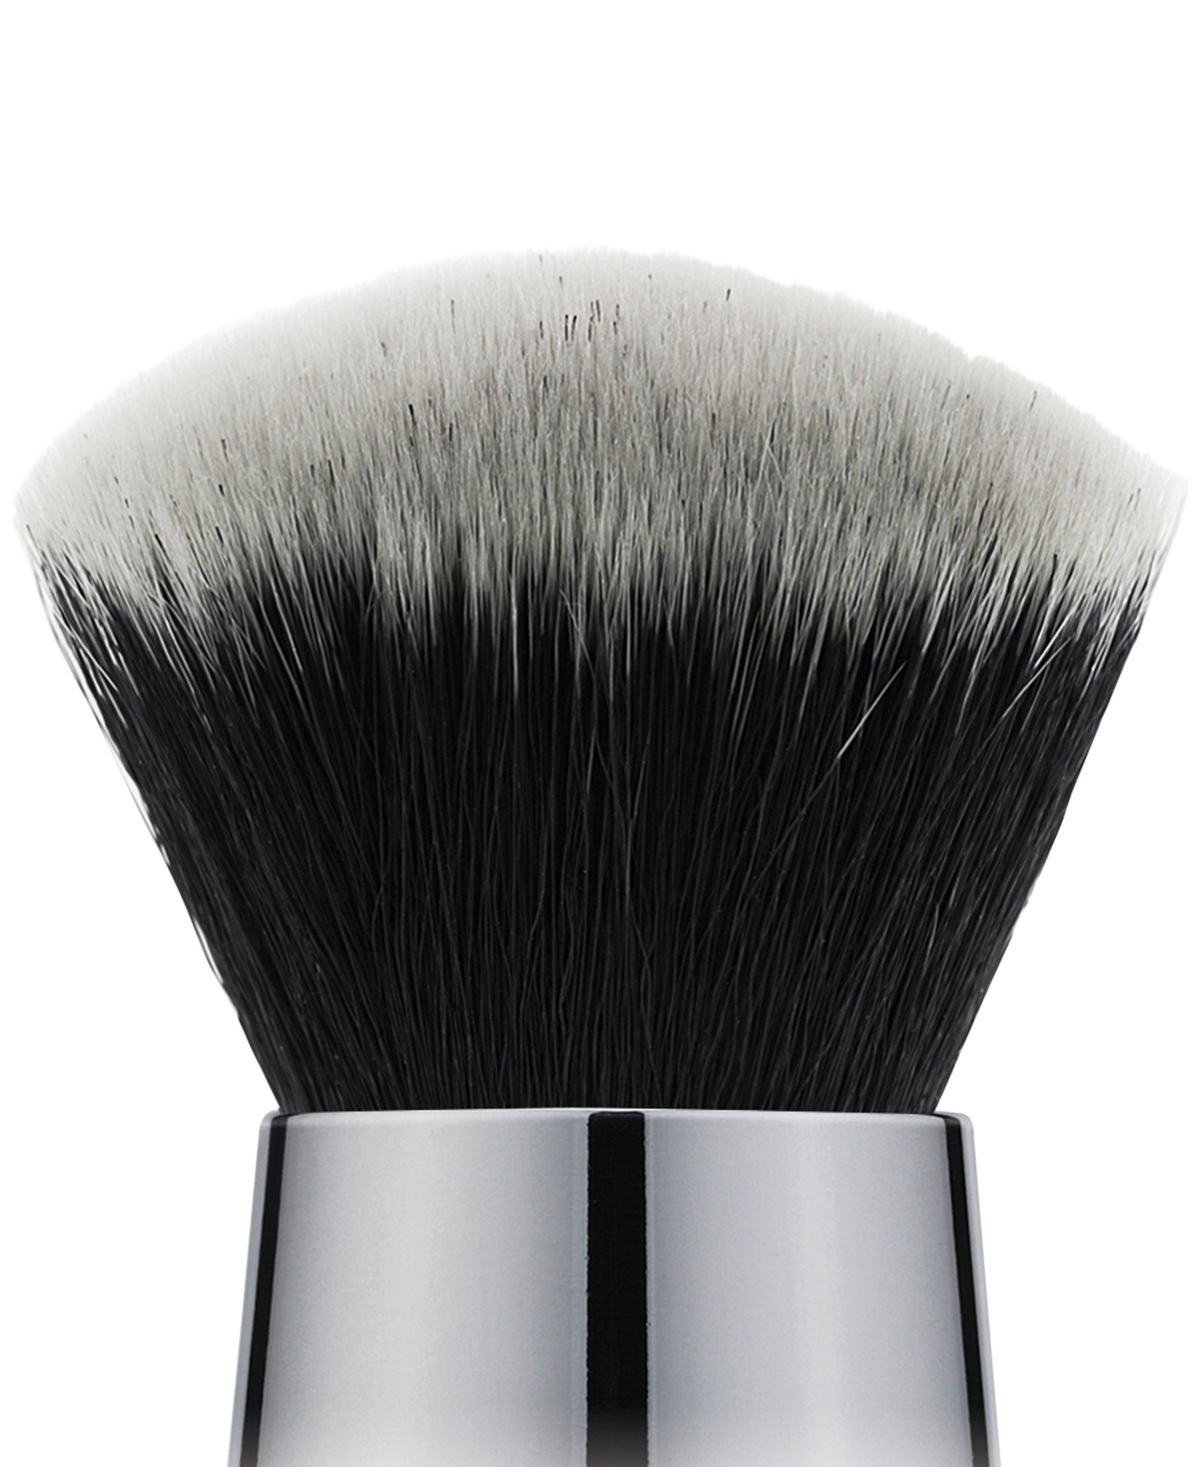 Michael Todd Sonicblend Beauty Round Top Replacement Universal Brush Head No. 10 - Grey